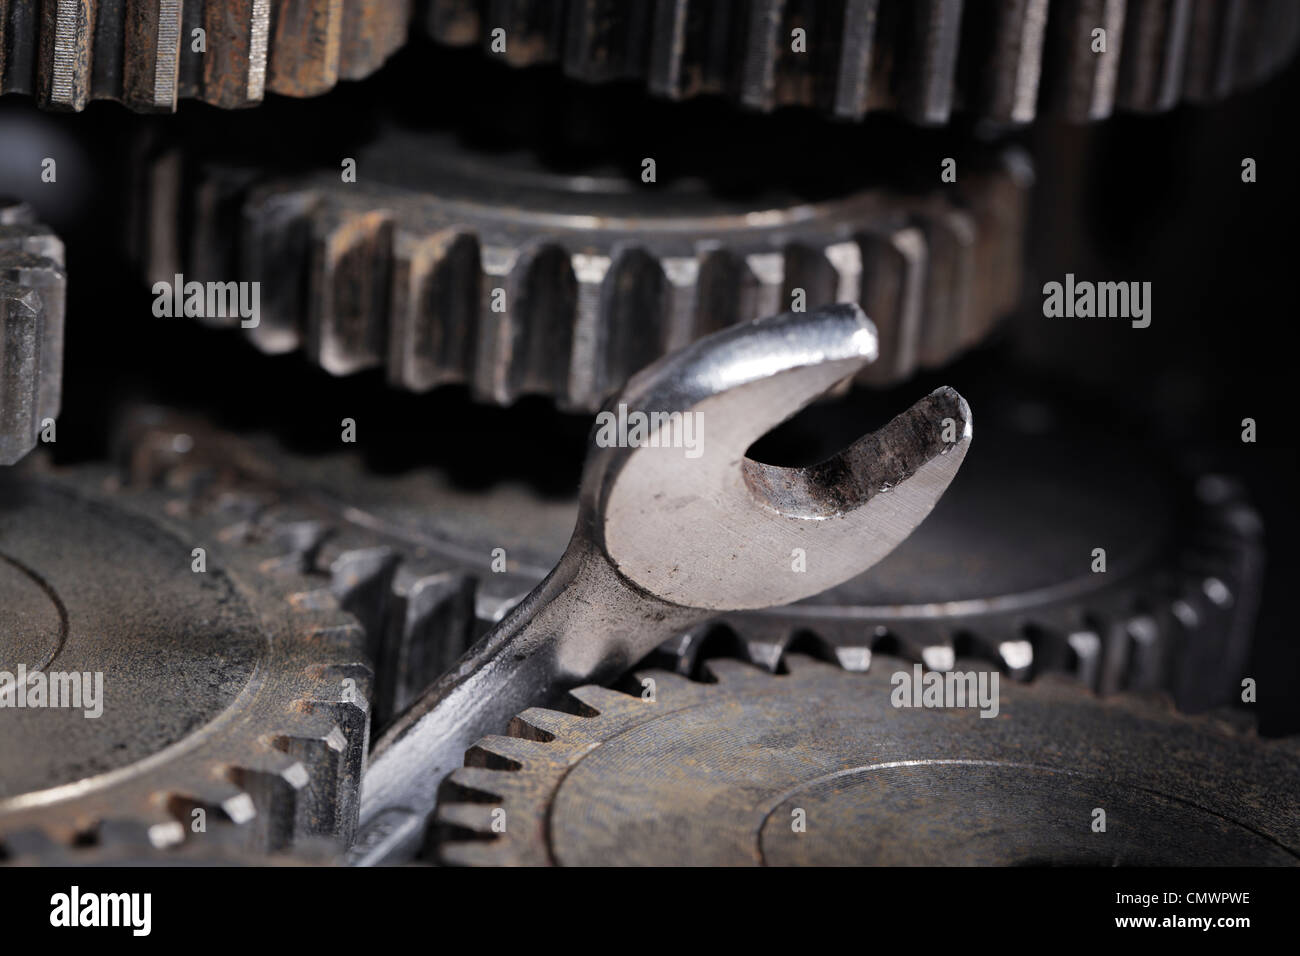 A Spanner Wrench stuck between cog gear wheels. Stock Photo